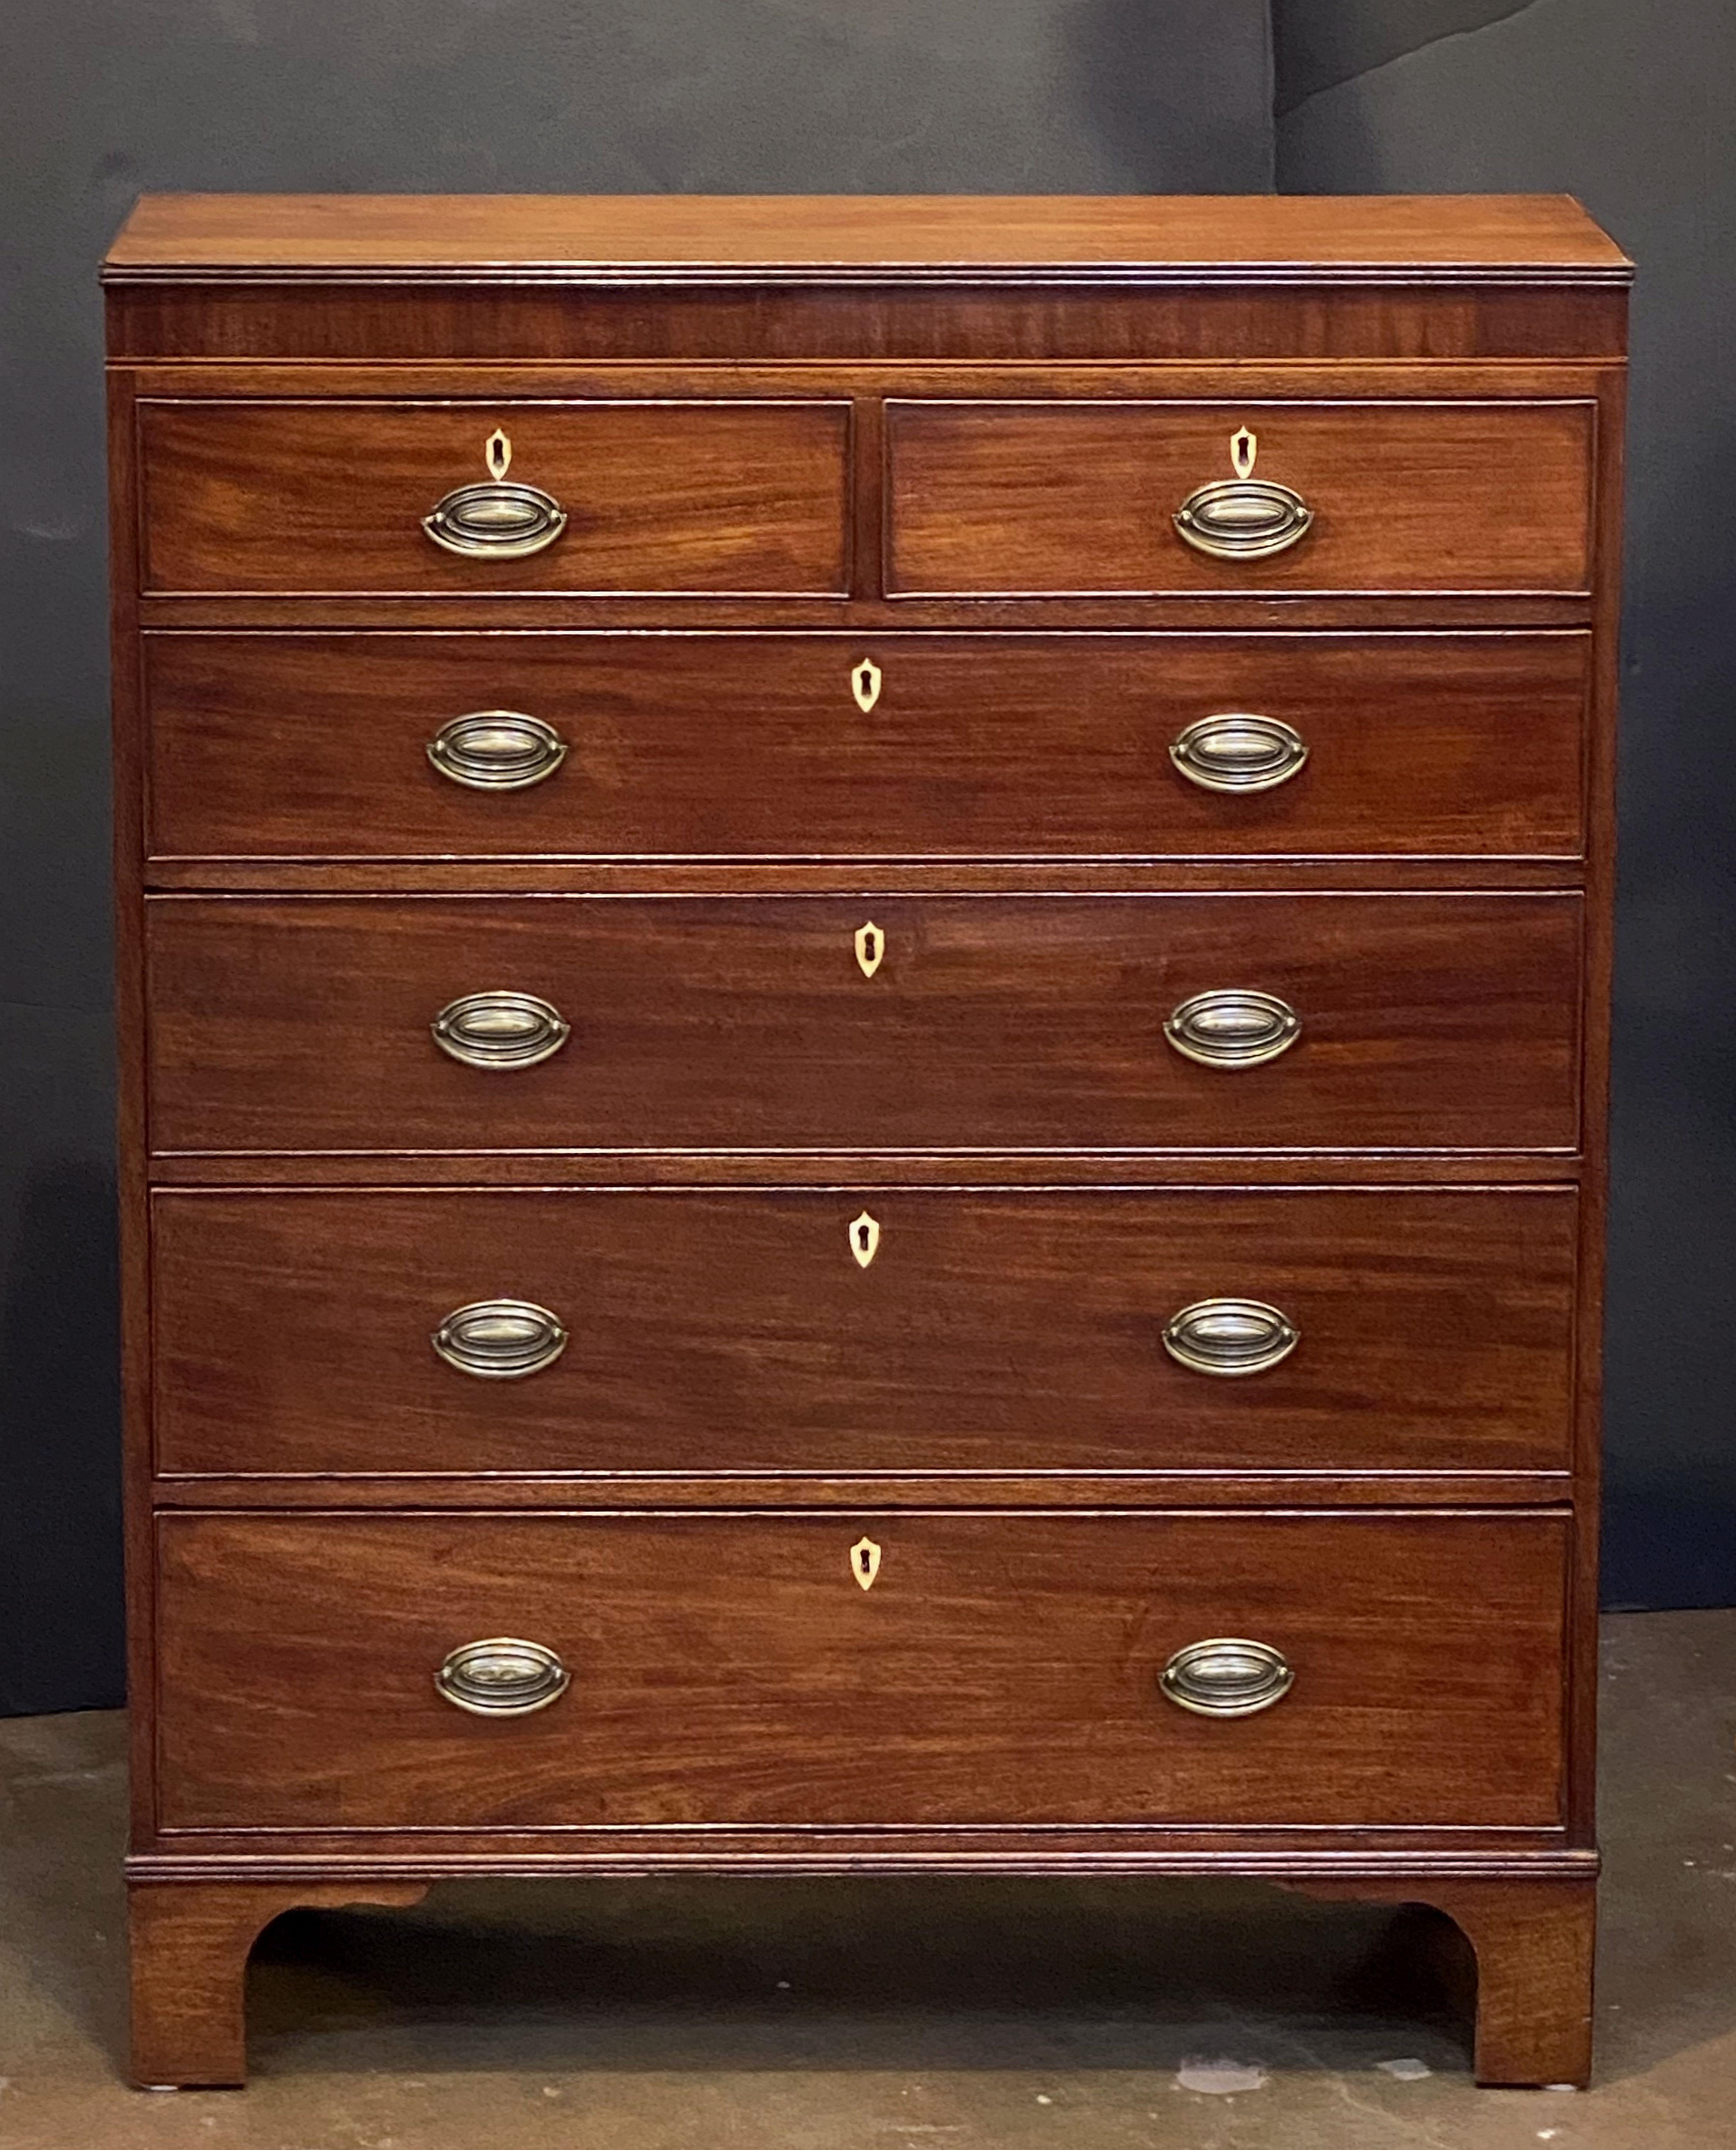 A fine English tall chest or high chest of mahogany, featuring a moulded rectangular top with reed edge, over an inlaid frieze of two beaded short drawers over four beaded long drawers, each drawer with brass hardware and bone escutcheons. Resting